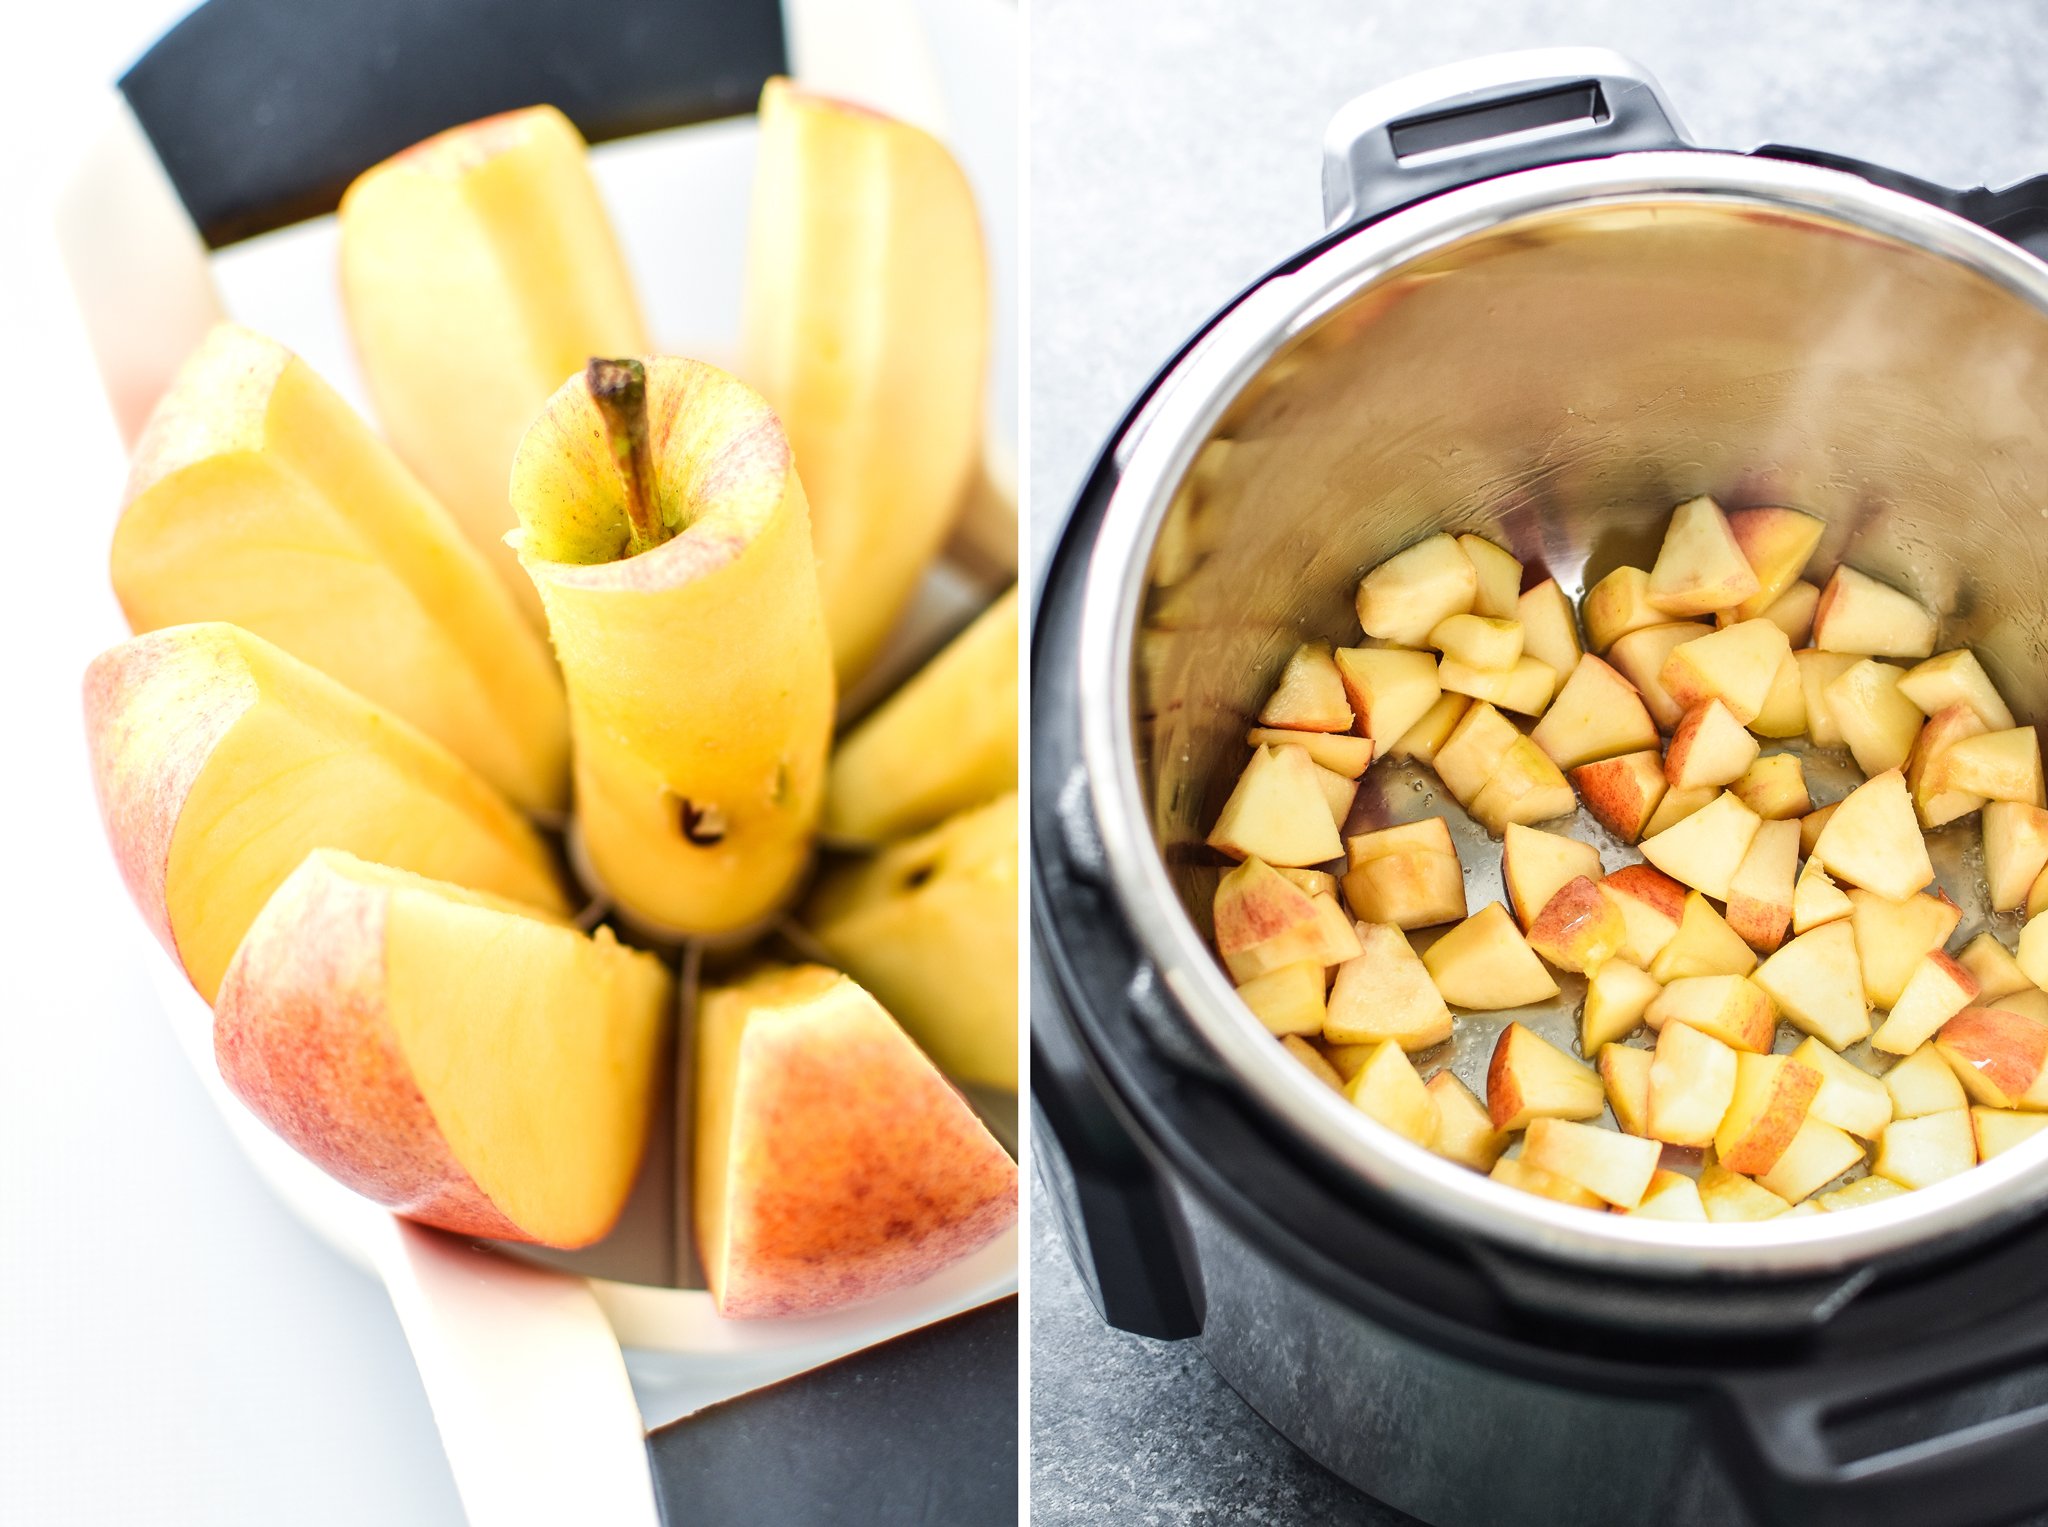 Left: Apple just cut with an apple cutter. Right: Cut apples cooking on saute in the Instant Pot.